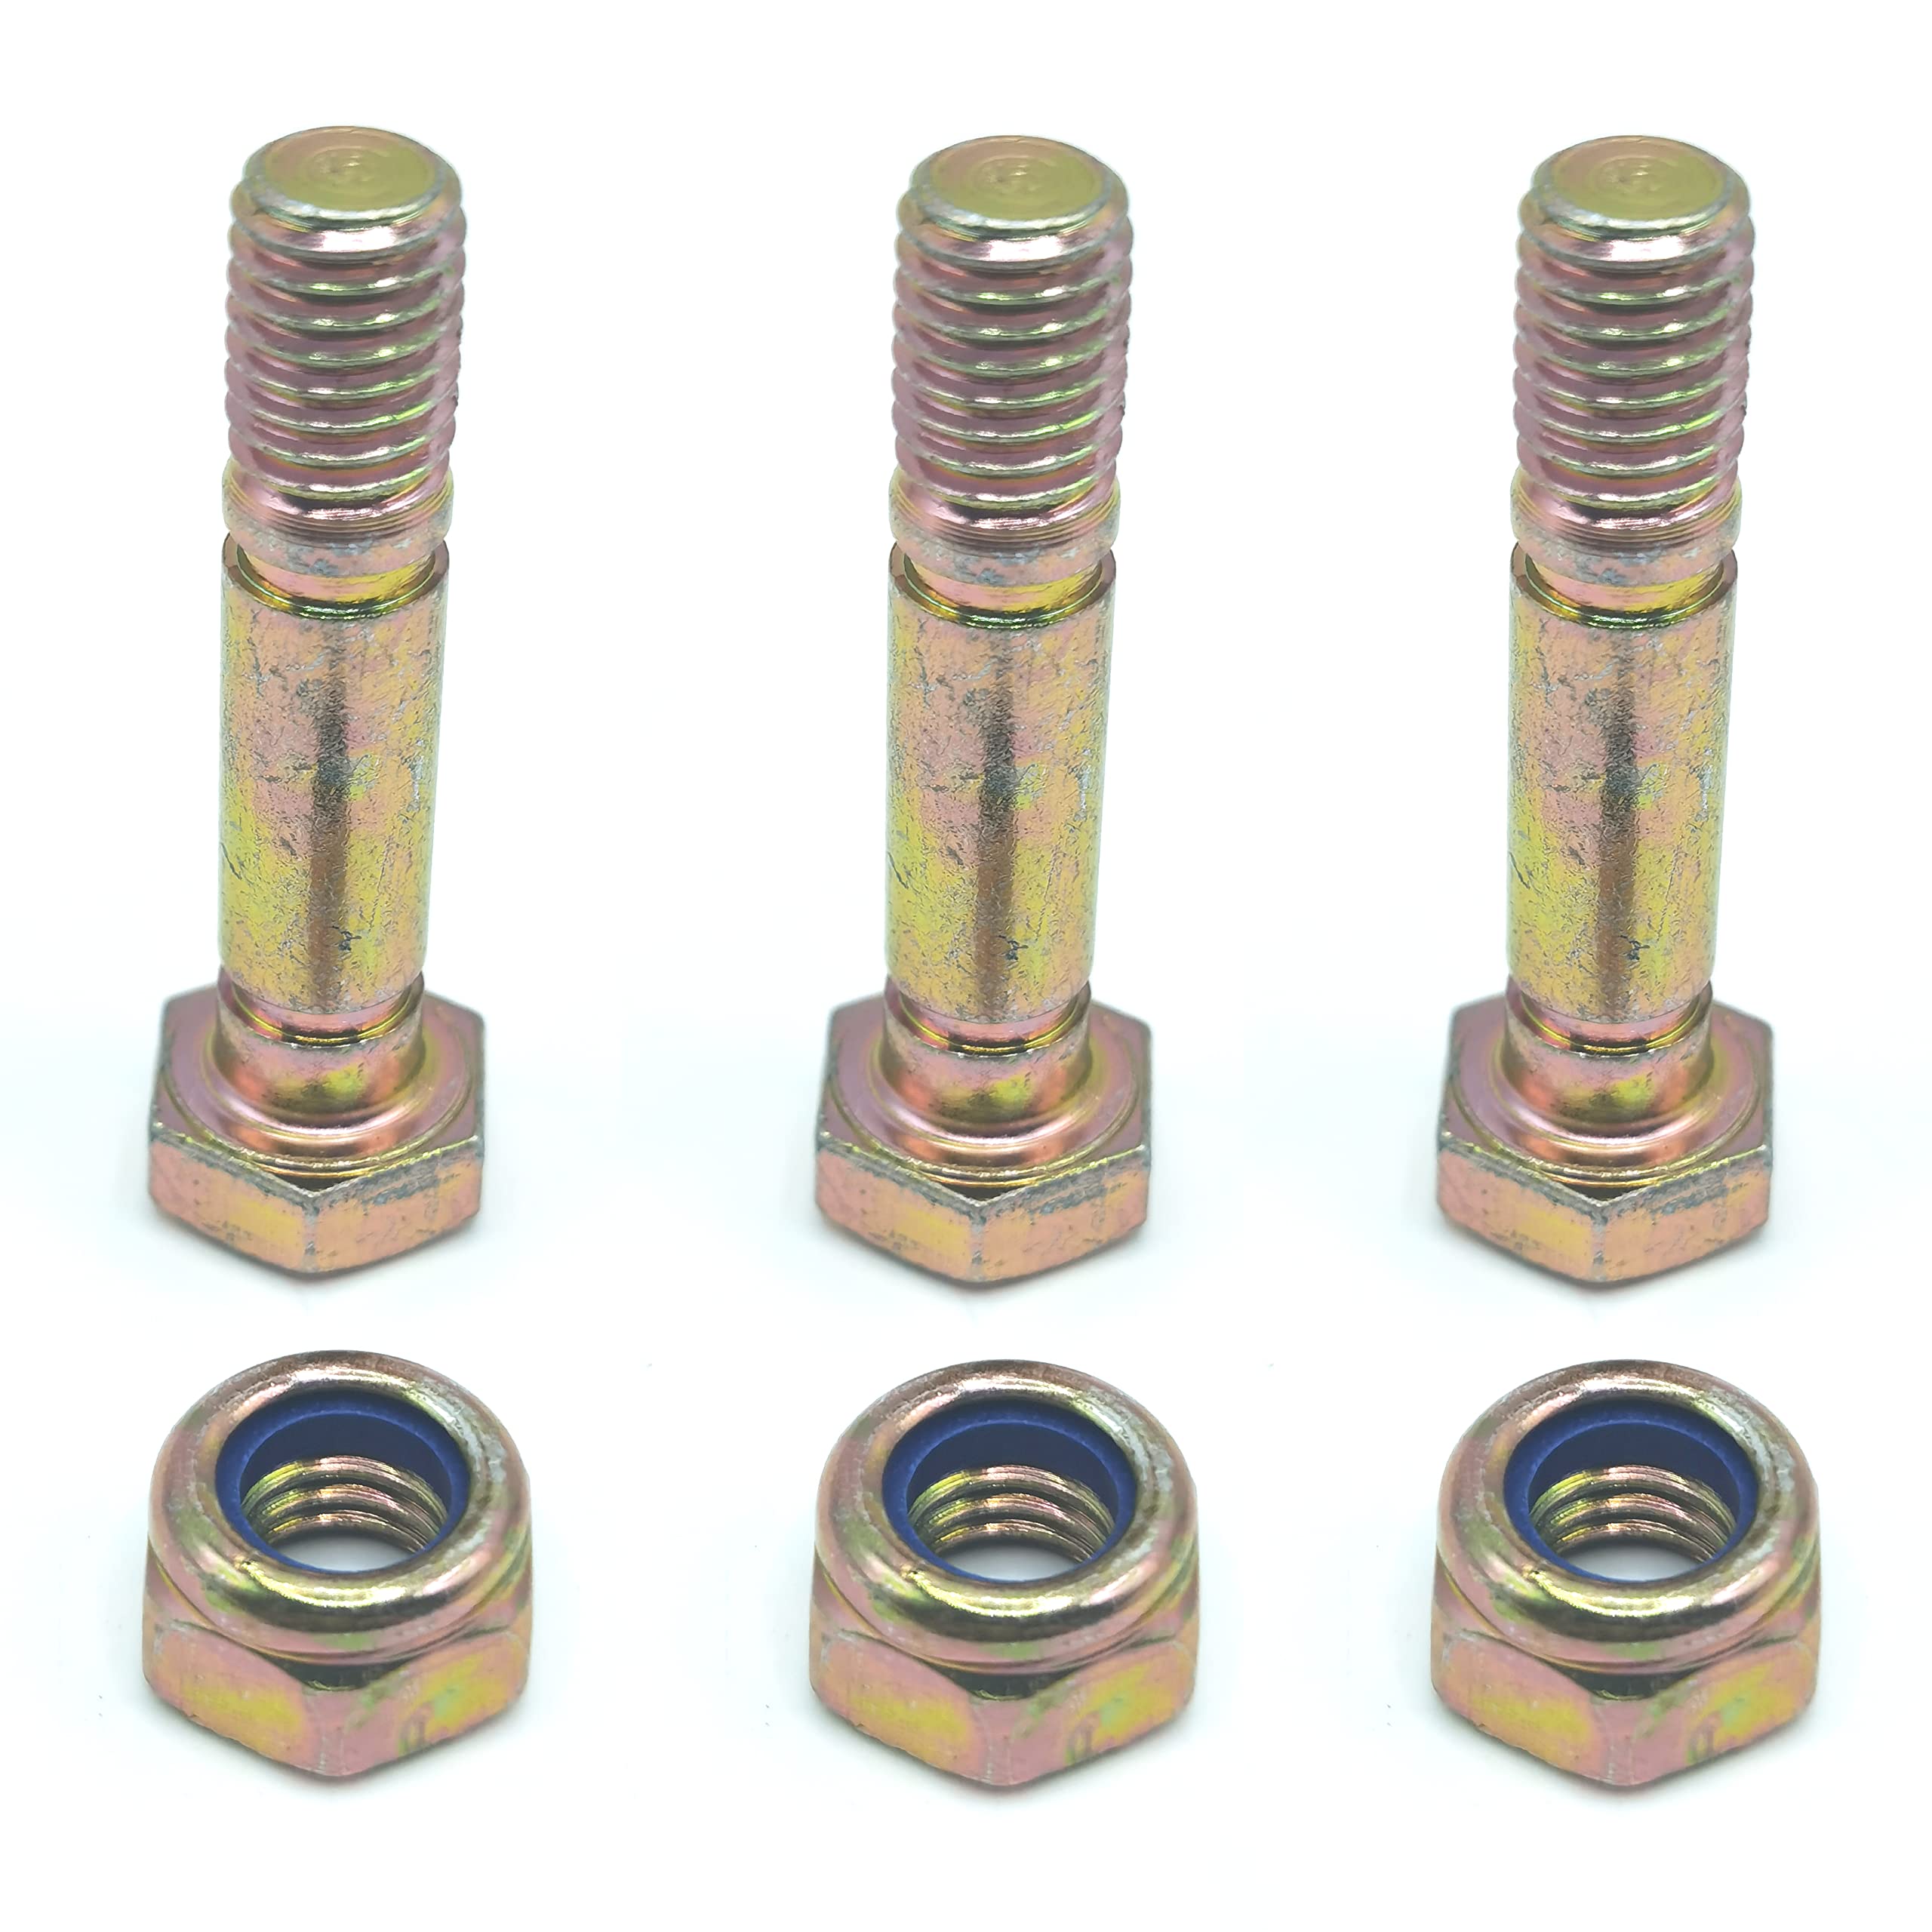 3 PK 710-0890 Shear Bolts and Nuts for MTD Craftsman Troy-Bilt Cub Cadet 710-0890A 910-0890A 910-0890 Two-Stage Snow Thrower Models (2004 & Prior) Includes Hex Nuts (1-1/2" x 5/16"-18)